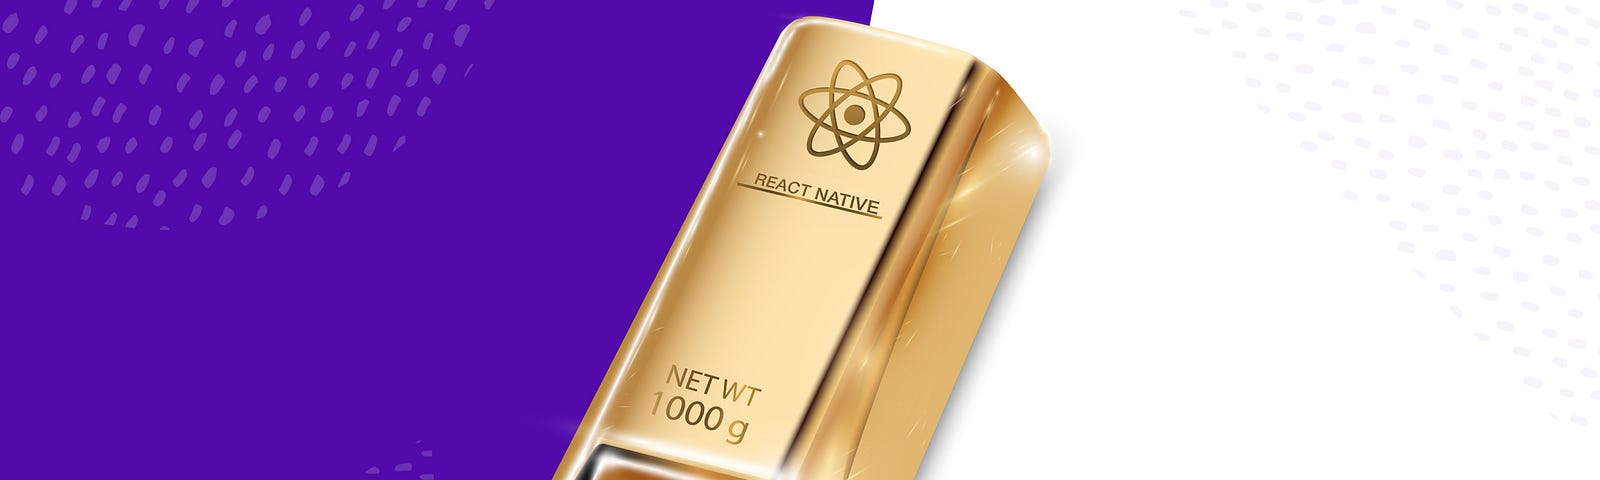 React Native is worth its weight in gold here at Phorest